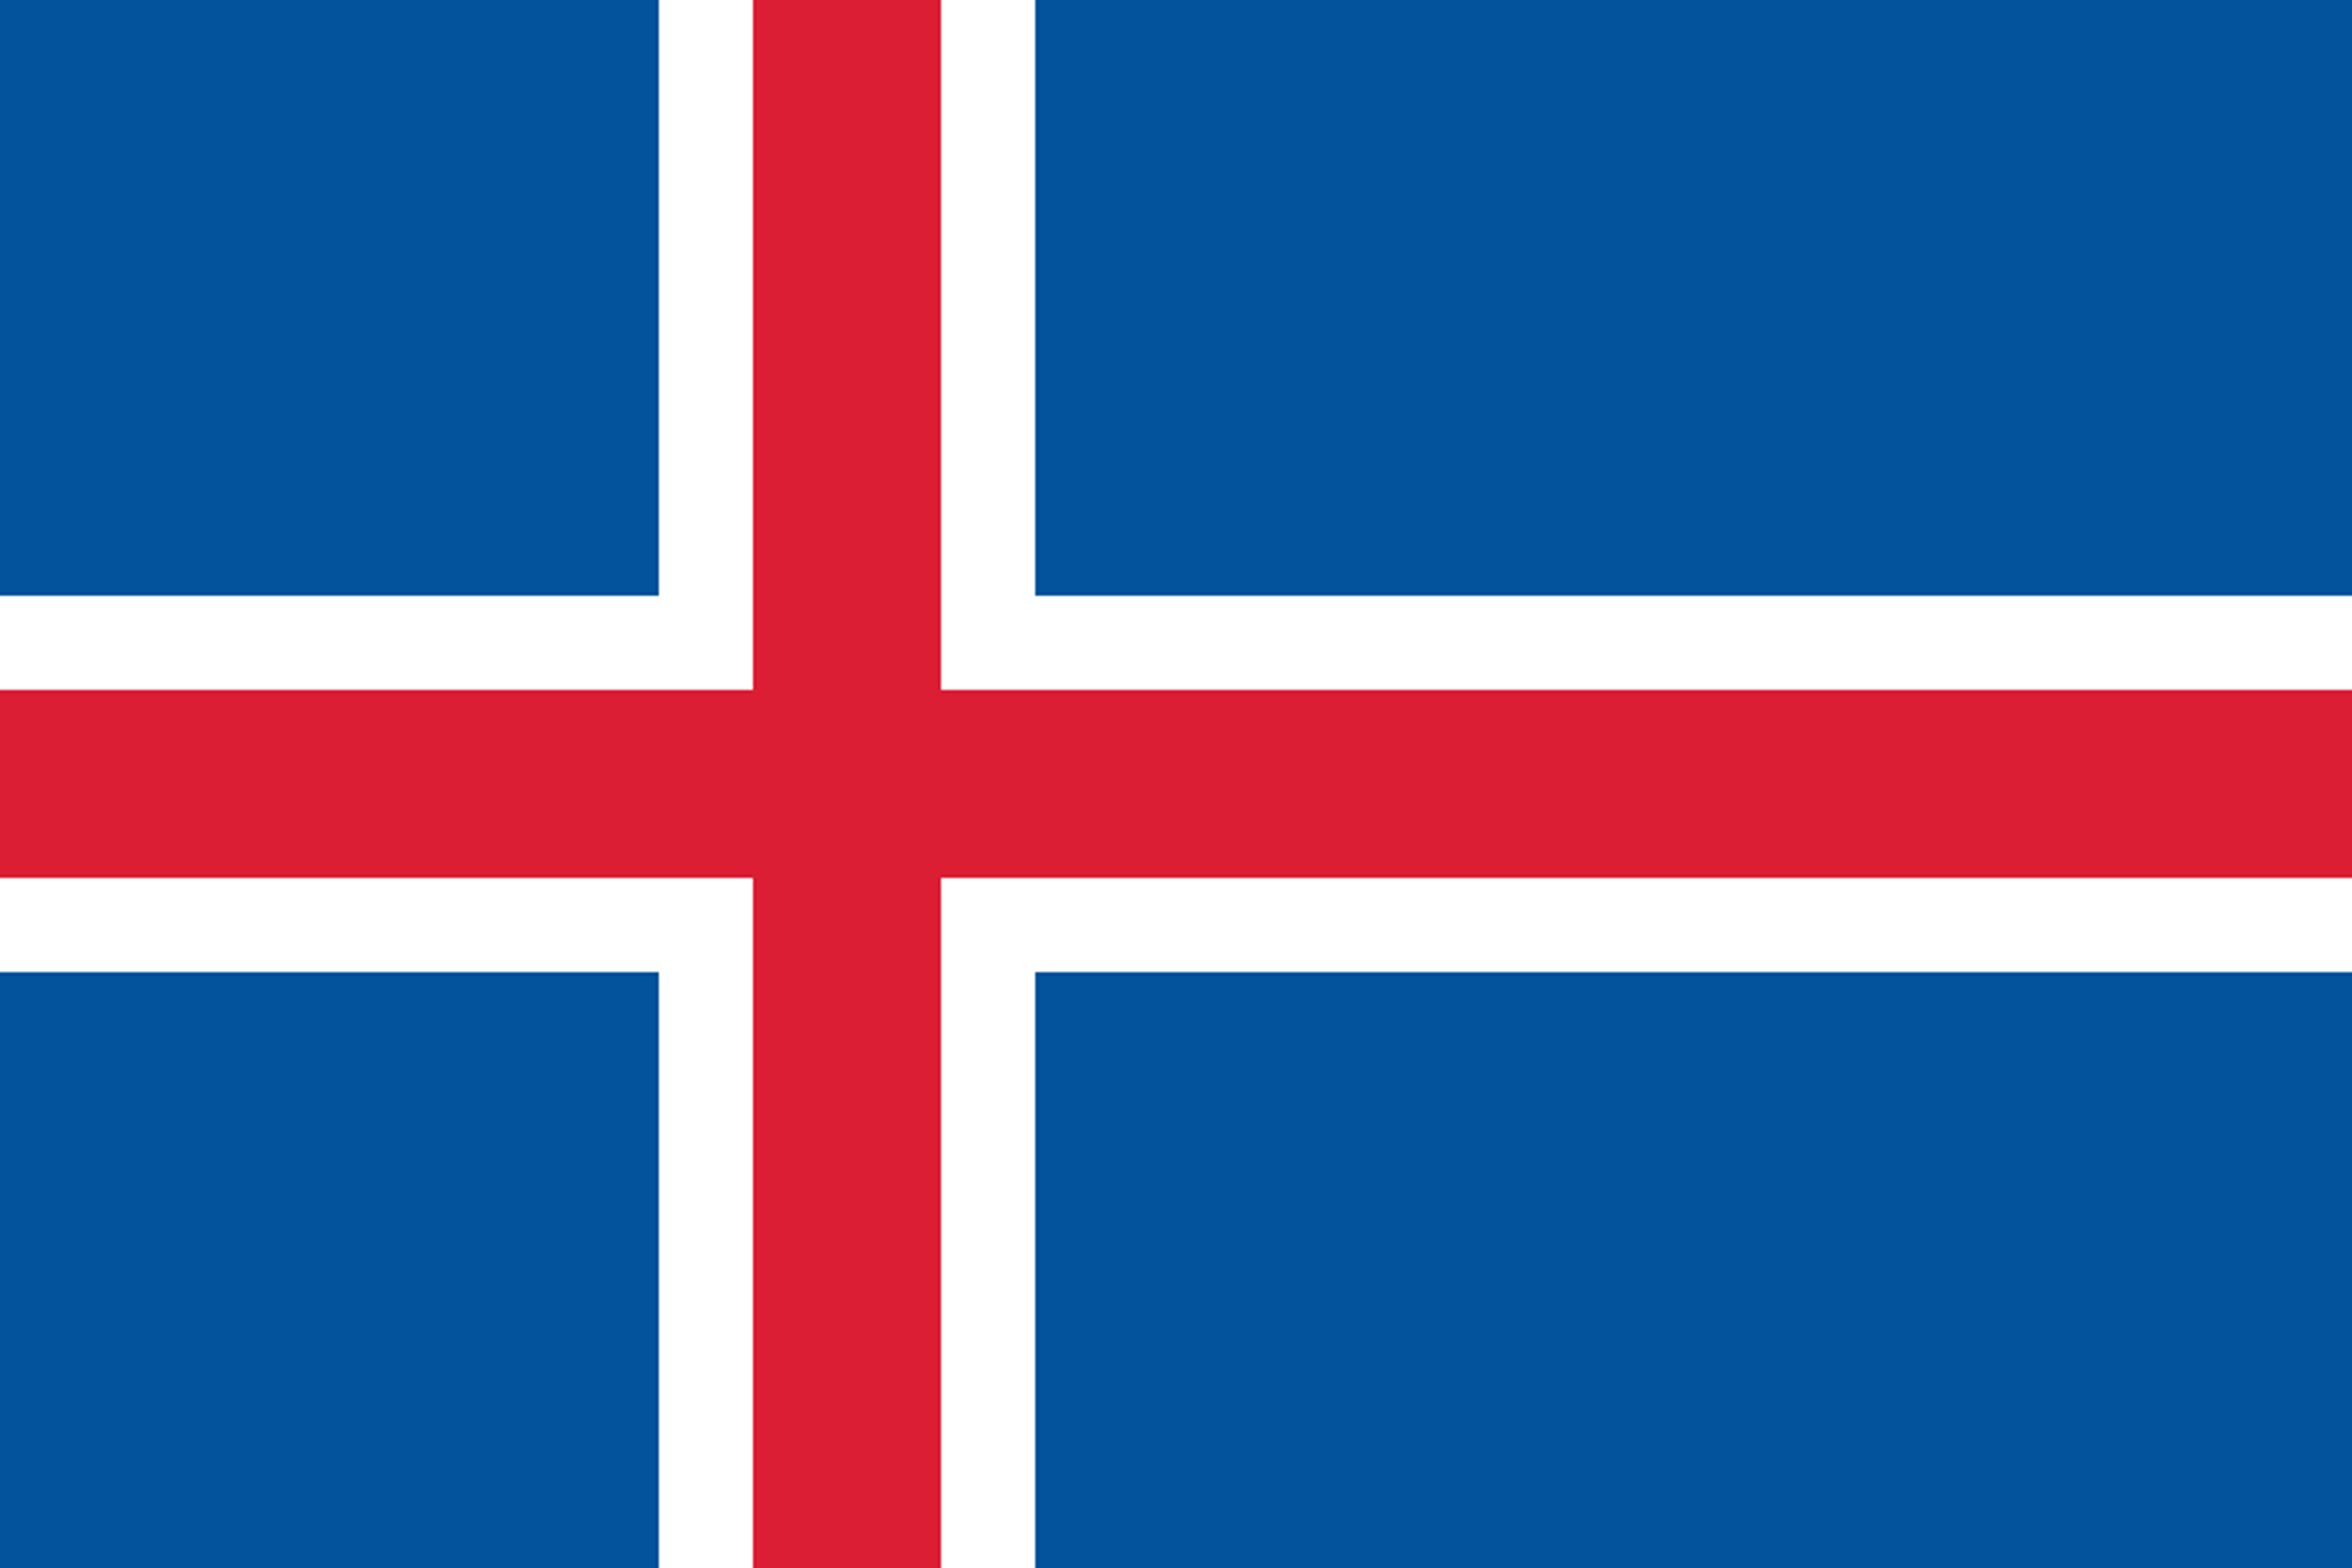 Iceland National Flag Today